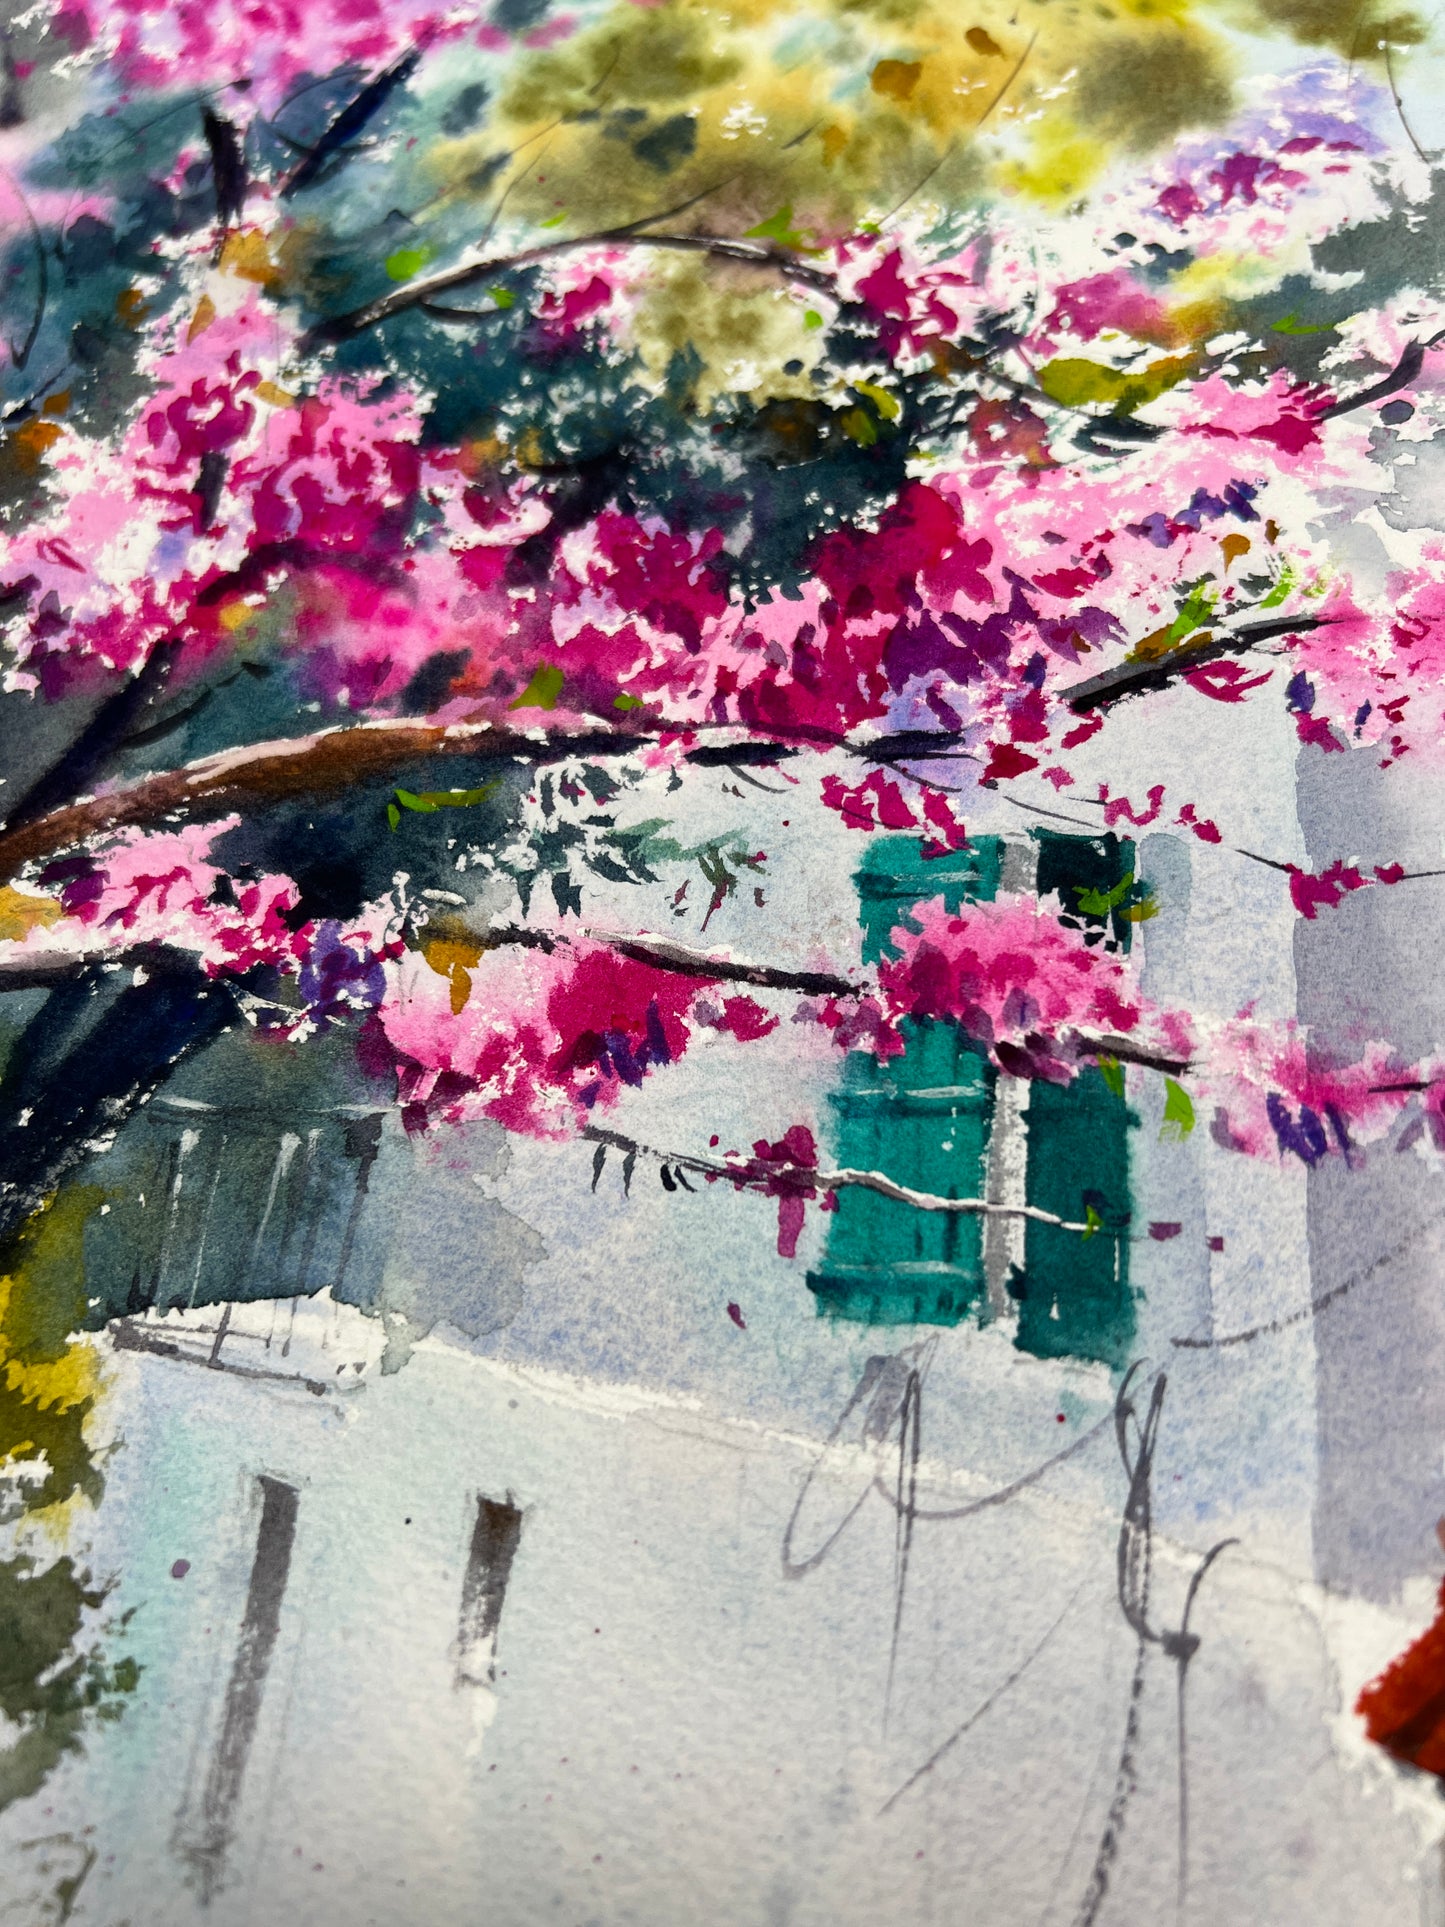 Cyprus Watercolor Painting, Original Artwork, Coastal Art Decor, Cercis Flowers, Cyprus Cityscape, Gift For Home